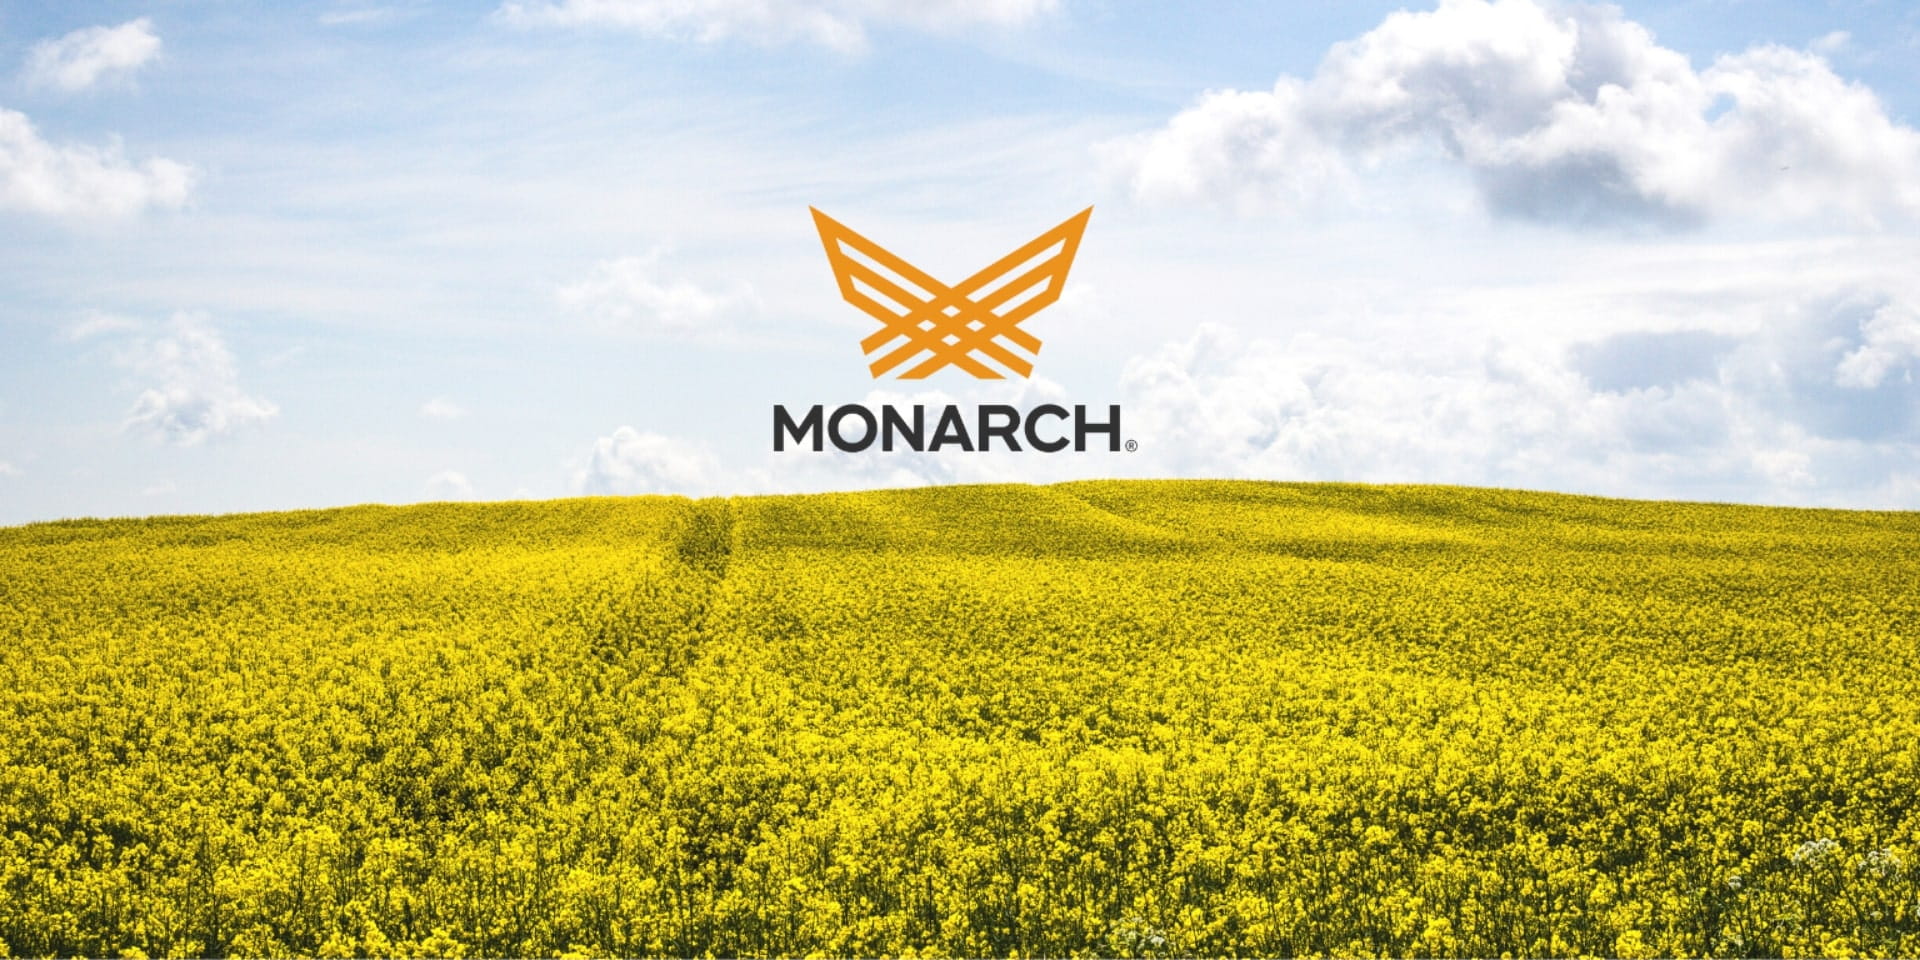 What’s In the Monarch Name and Logo?